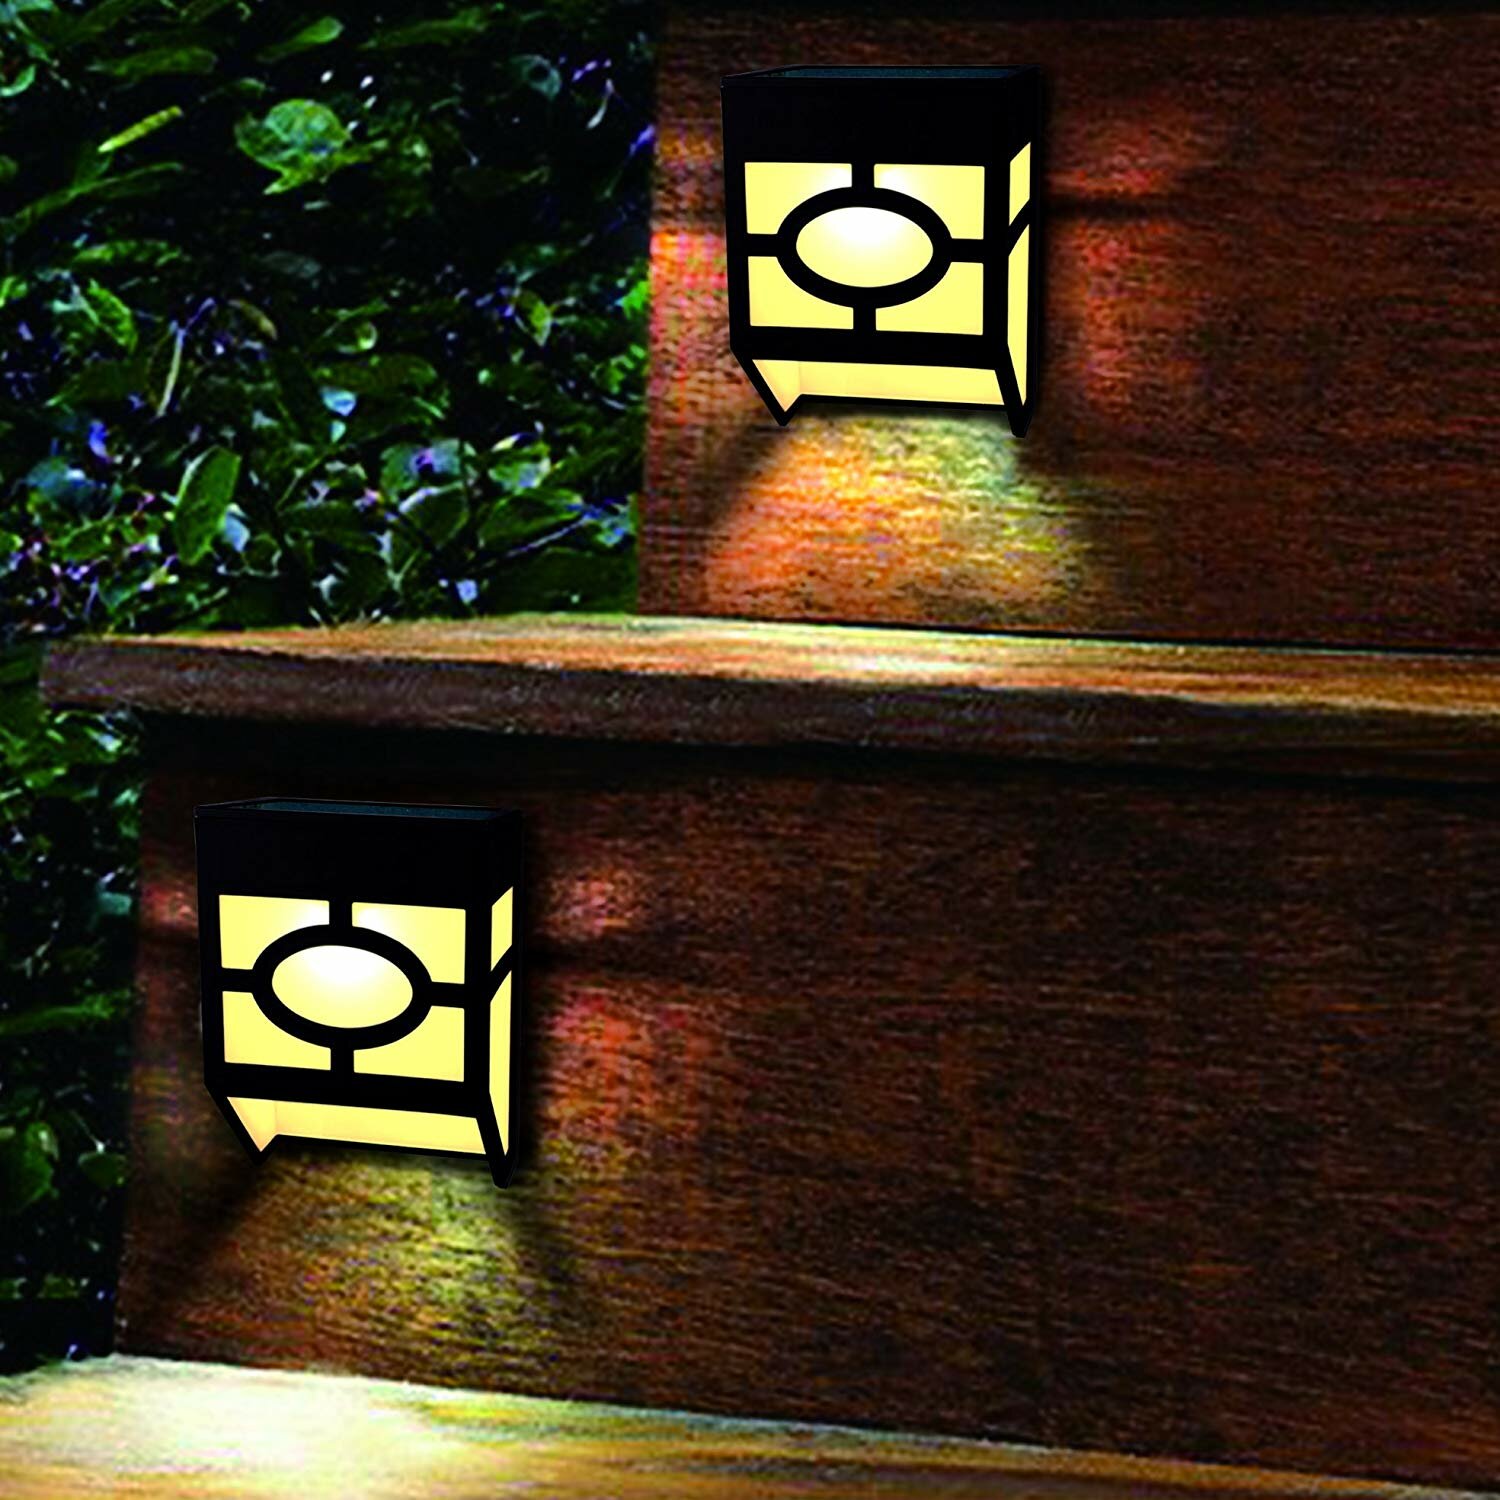 Solar Lights 4PCS Patio Wall-Mounted 6 LED Decorative Step Lights with Auto Sensor for Pathway Garden Deck MoKo Outdoor Waterproof Solar Powered Security Lamp Driveway Yard White